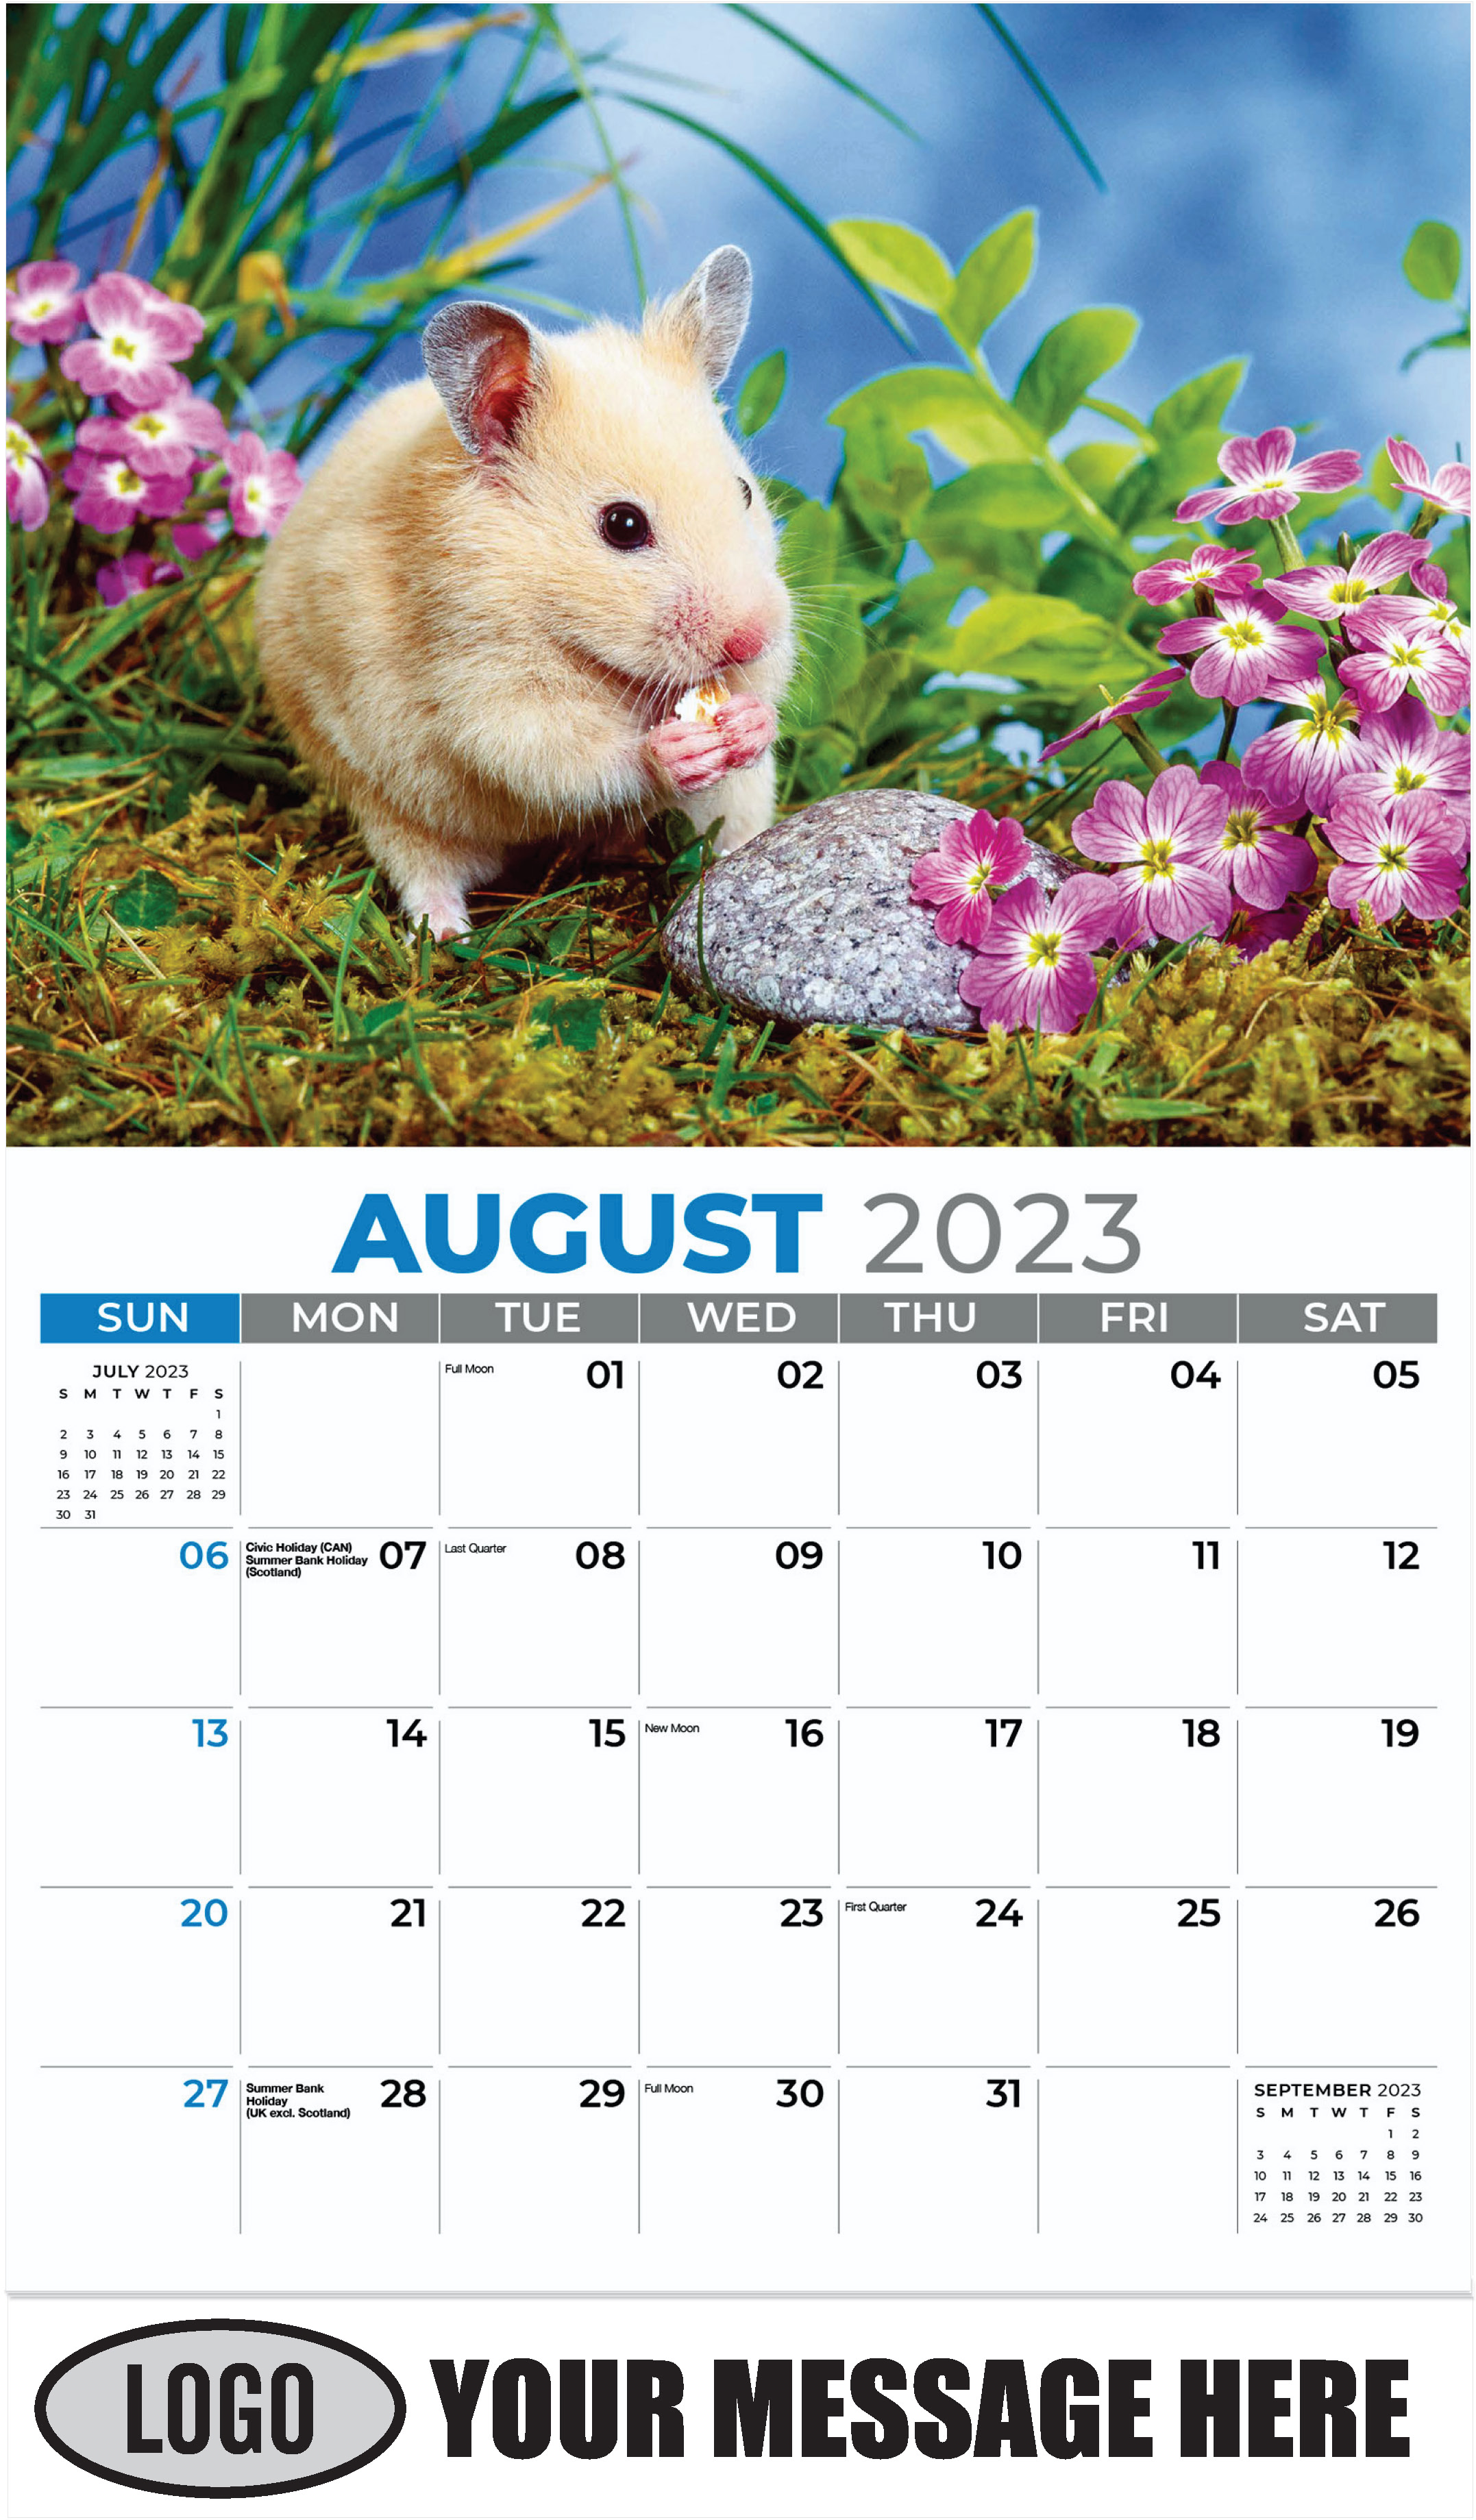 Syrian Hamster - August - Pets 2023 Promotional Calendar